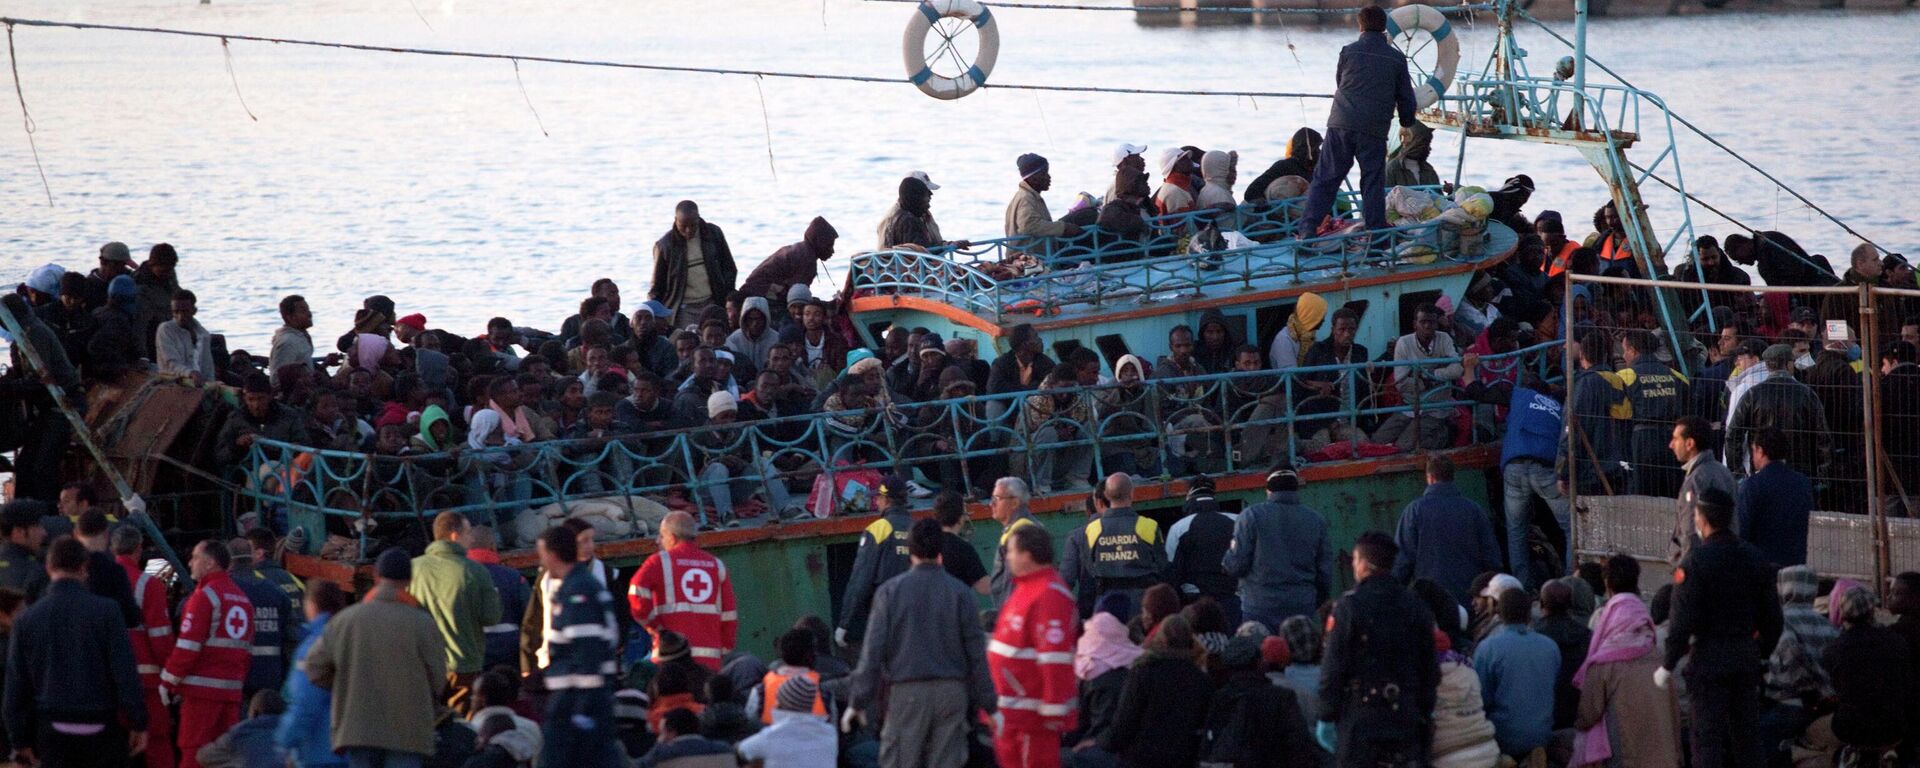 Immigrants disembark a boat at Lampedusa's harbor, Italy, Friday, April 8, 2011. After days of fierce sparring, Italy and France patched up their differences Friday over the fate of thousands of Tunisian migrants, avoiding a major rift over European Union border control rules. Top security officials from Italy and France sought a conciliatory tone as they struggled with the crush of more than 20,000 Tunisians who sailed on often rickety boats to Italy's southernmost point, the tiny Mediterranean island of Lampedusa. (AP Photo/Giorgos Moutafis)  GREECE OUT - Sputnik International, 1920, 10.09.2022